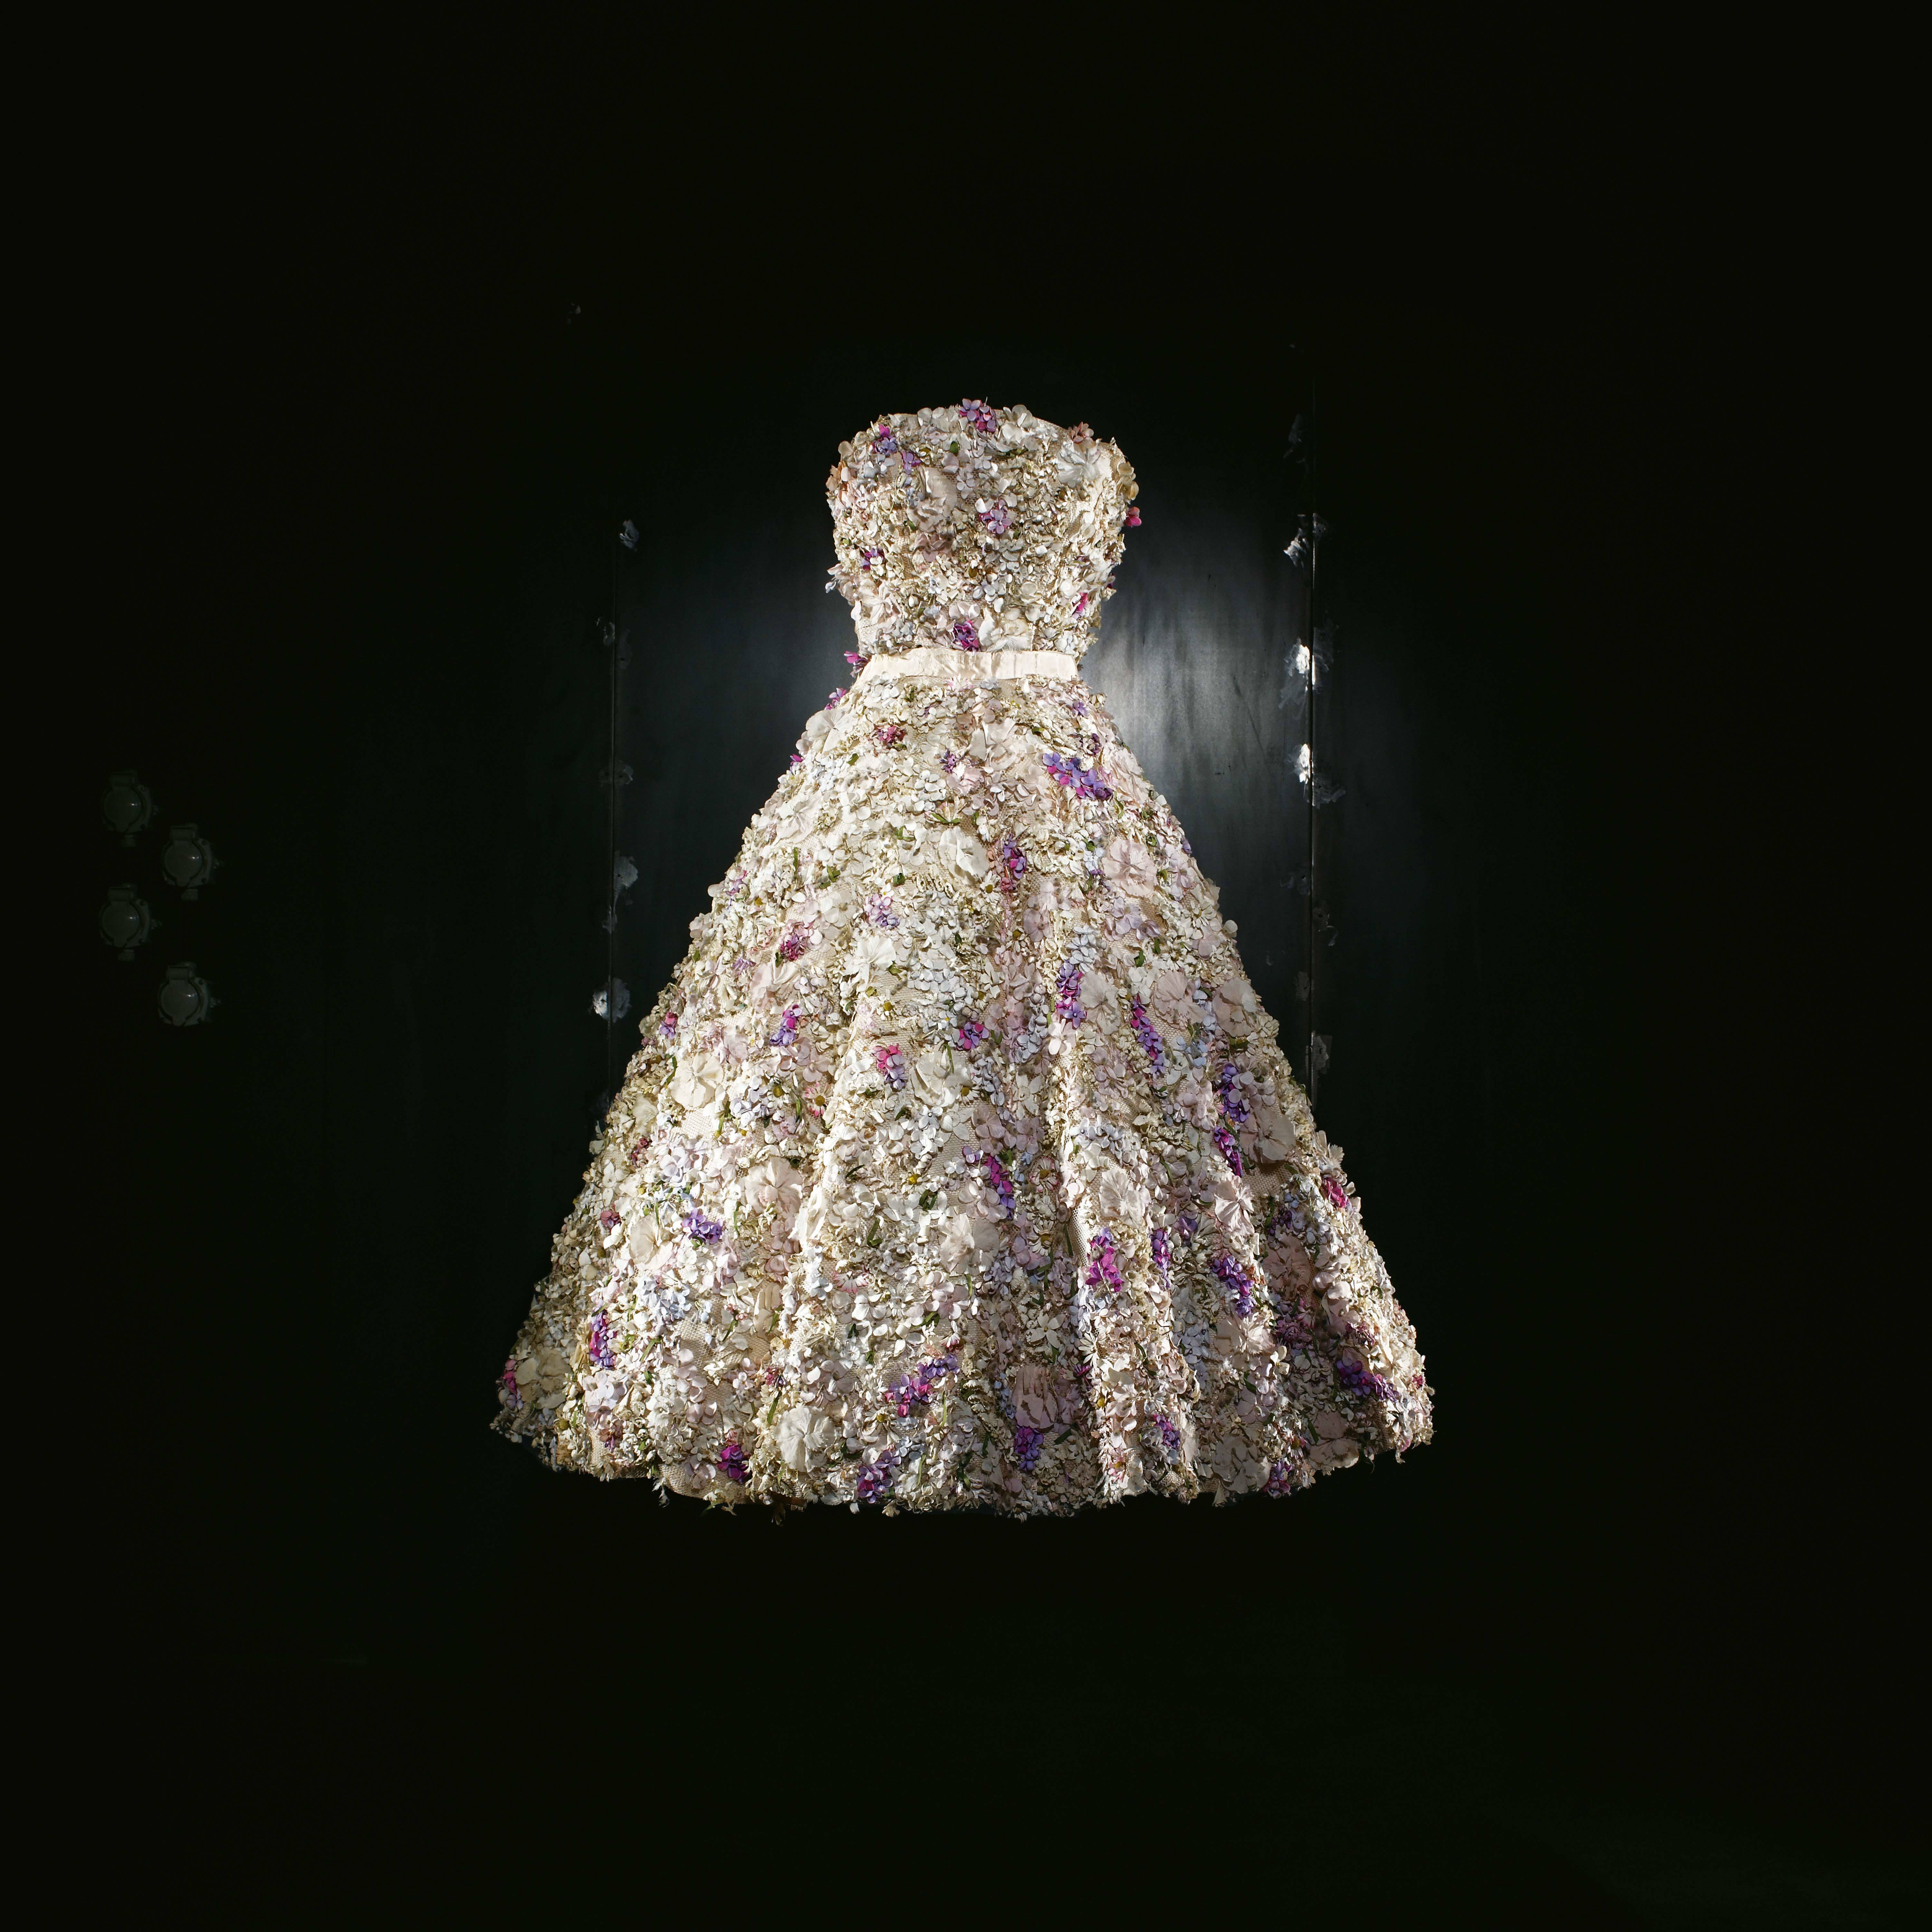 House of Dior 70 years of Christian Dior collections  in pictures   Fashion  The Guardian